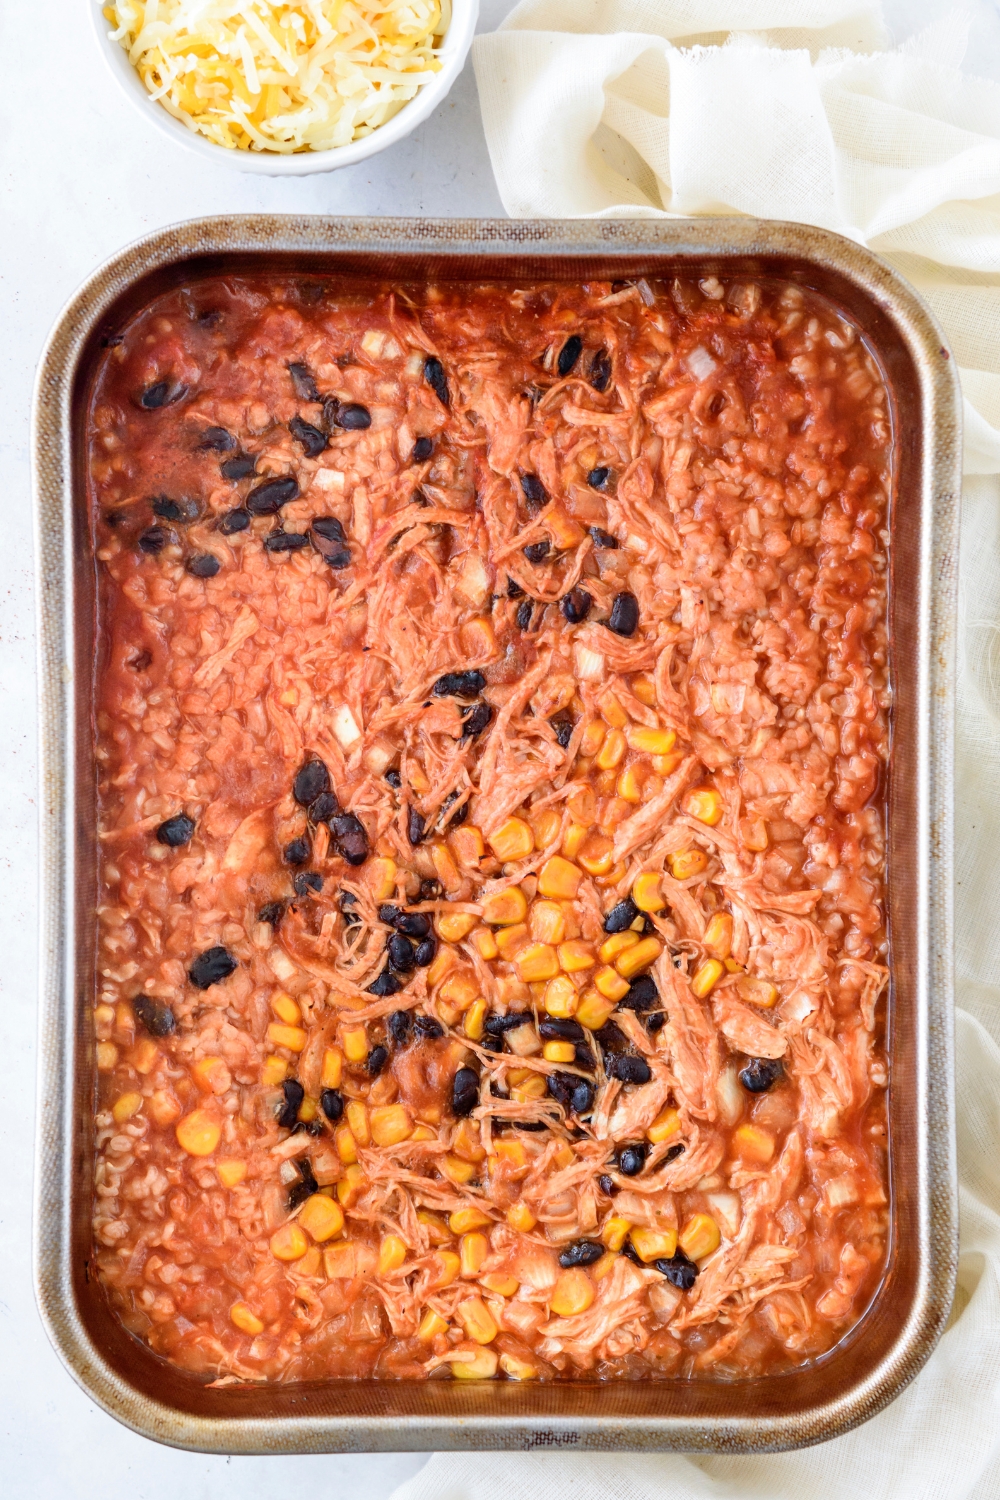 baking dish filled with shredded chicken, black beans, corn, and diced onion in a tomato sauce.